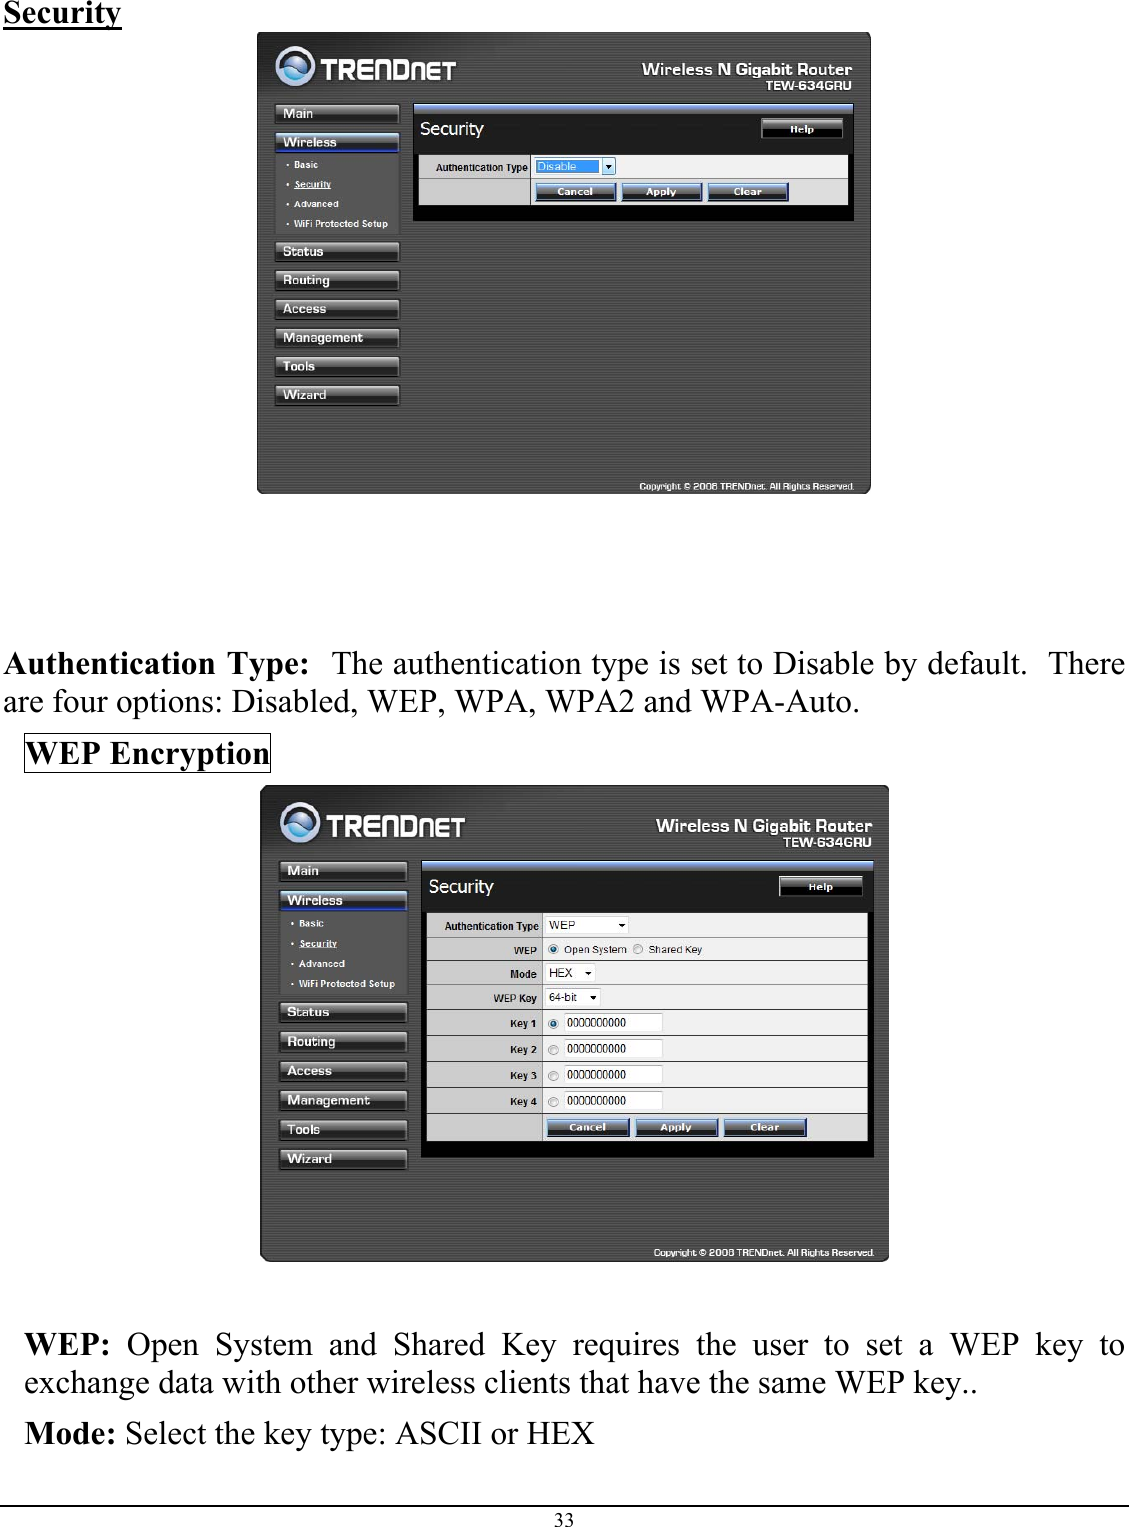 33  Security       Authentication Type:  The authentication type is set to Disable by default.  There are four options: Disabled, WEP, WPA, WPA2 and WPA-Auto. WEP Encryption   WEP: Open System and Shared Key requires the user to set a WEP key to exchange data with other wireless clients that have the same WEP key.. Mode: Select the key type: ASCII or HEX 